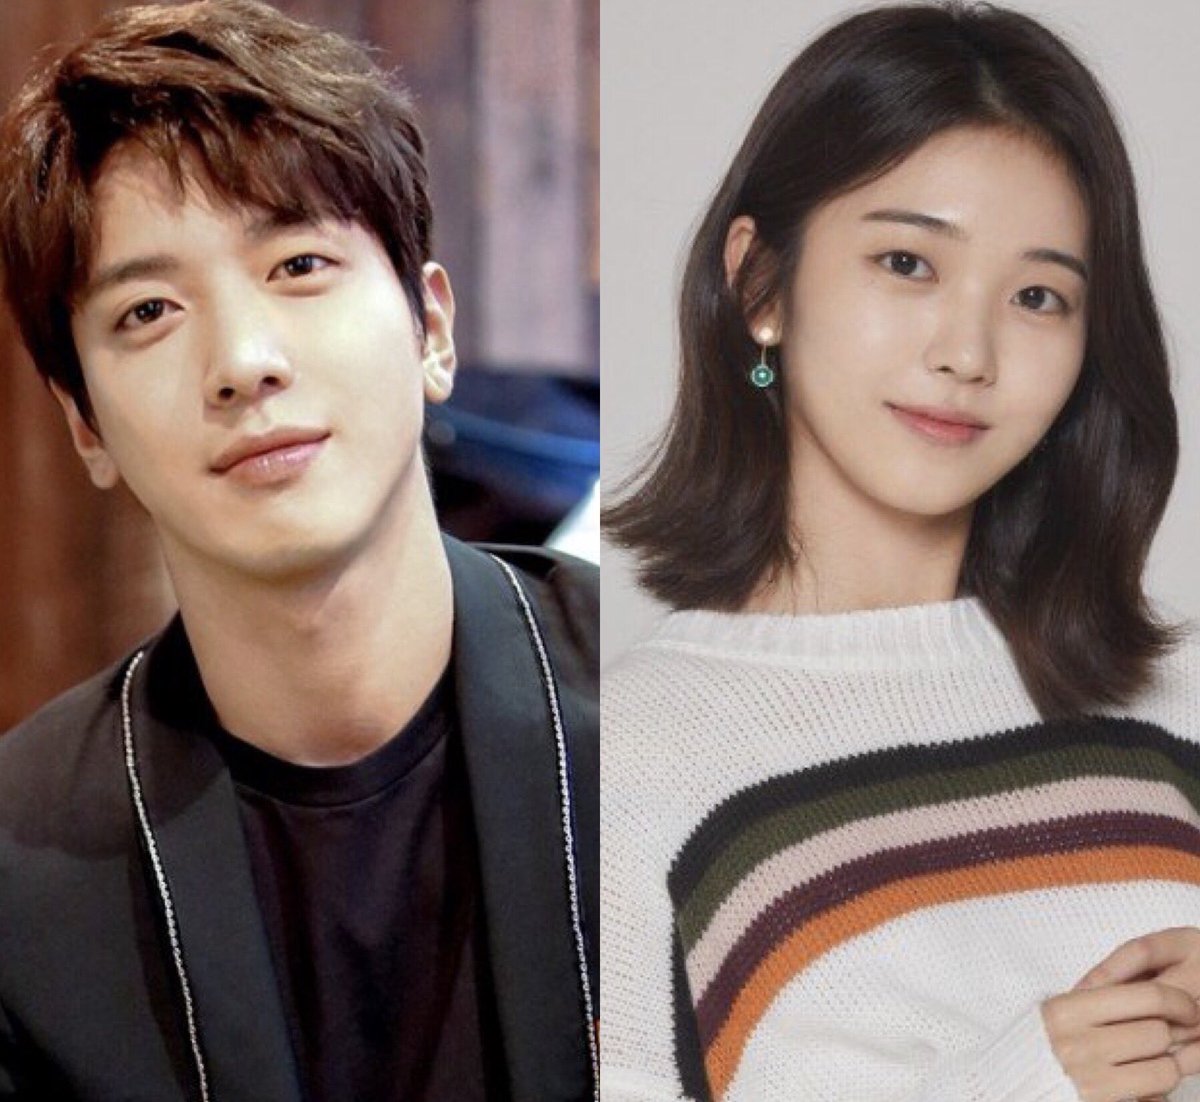 #HongSeungHee in talks to star opposite #CNBLUE #Yonghwa for upcoming romcom drama #YouOutofNowhere.

entertain.naver.com/read?oid=052&a…